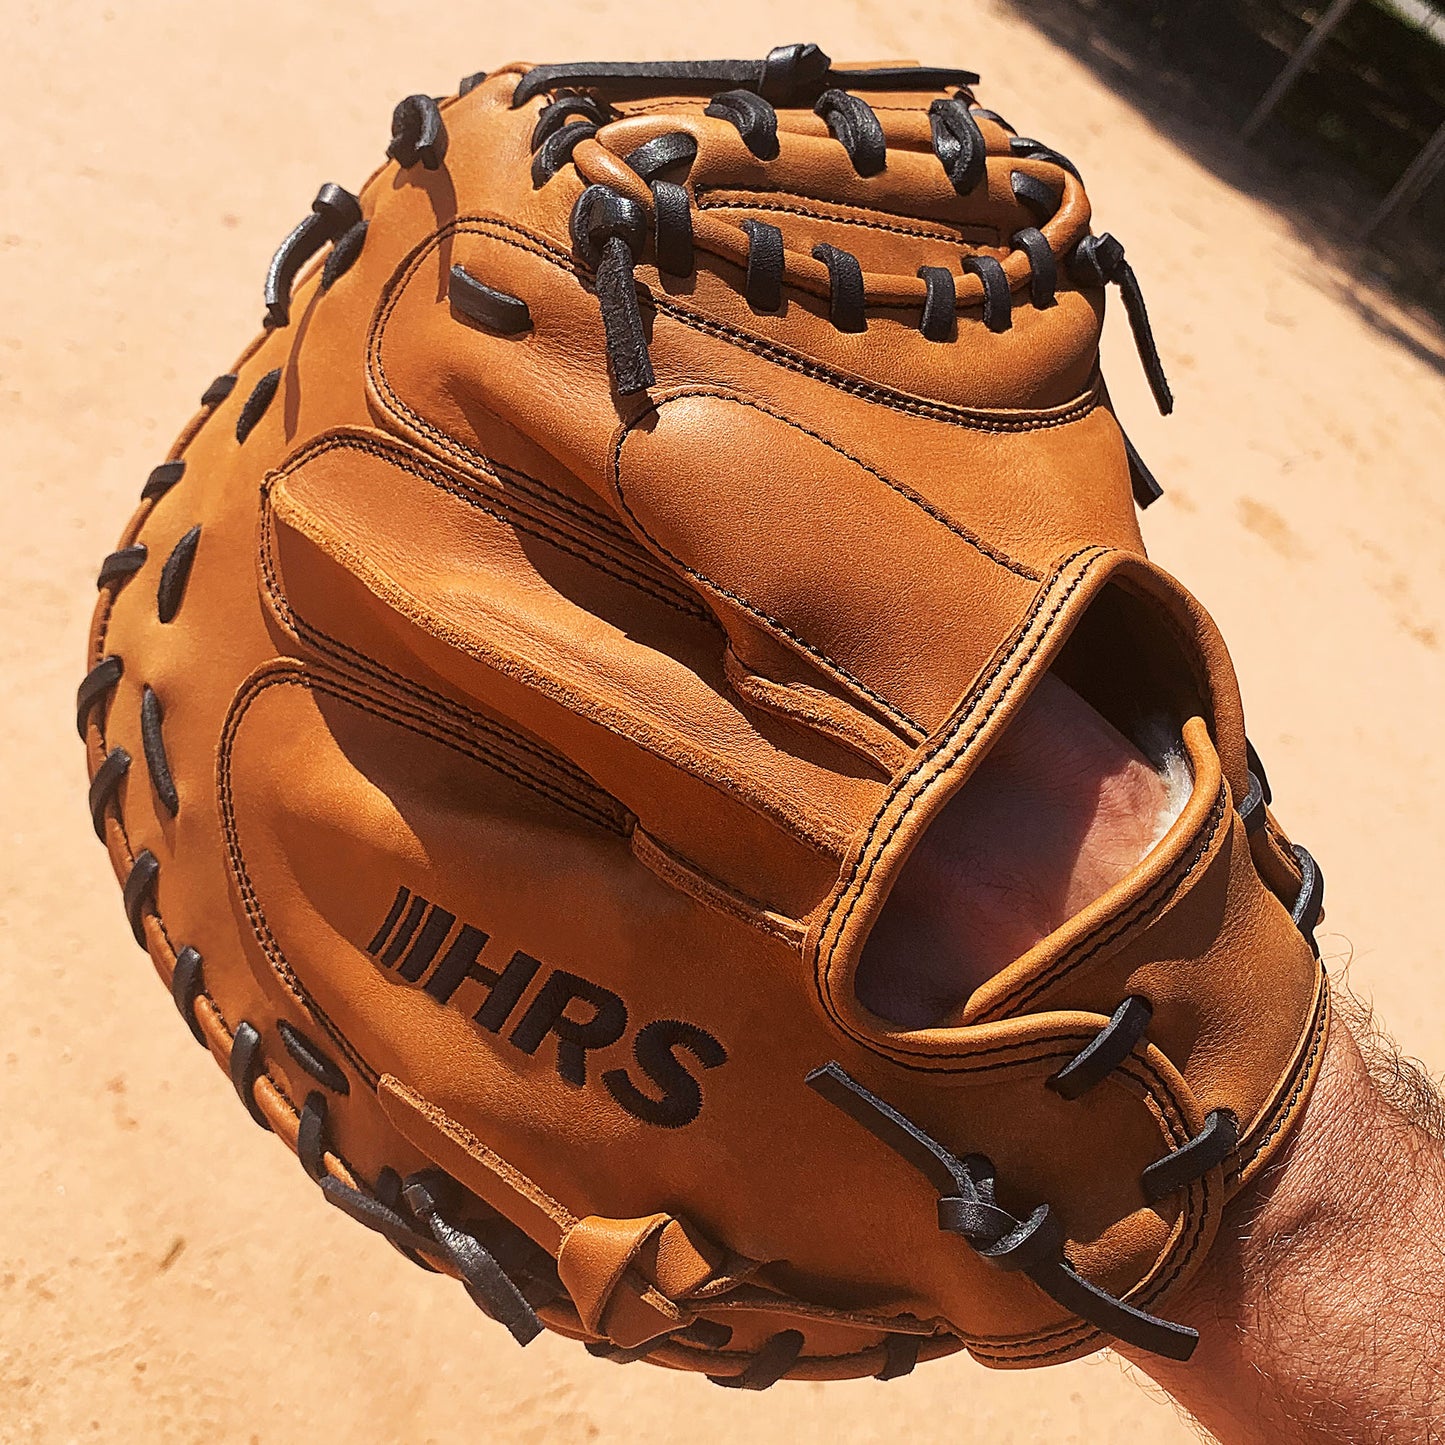 33.5" Baseball Catcher's Mitt - Tan with Black Laces